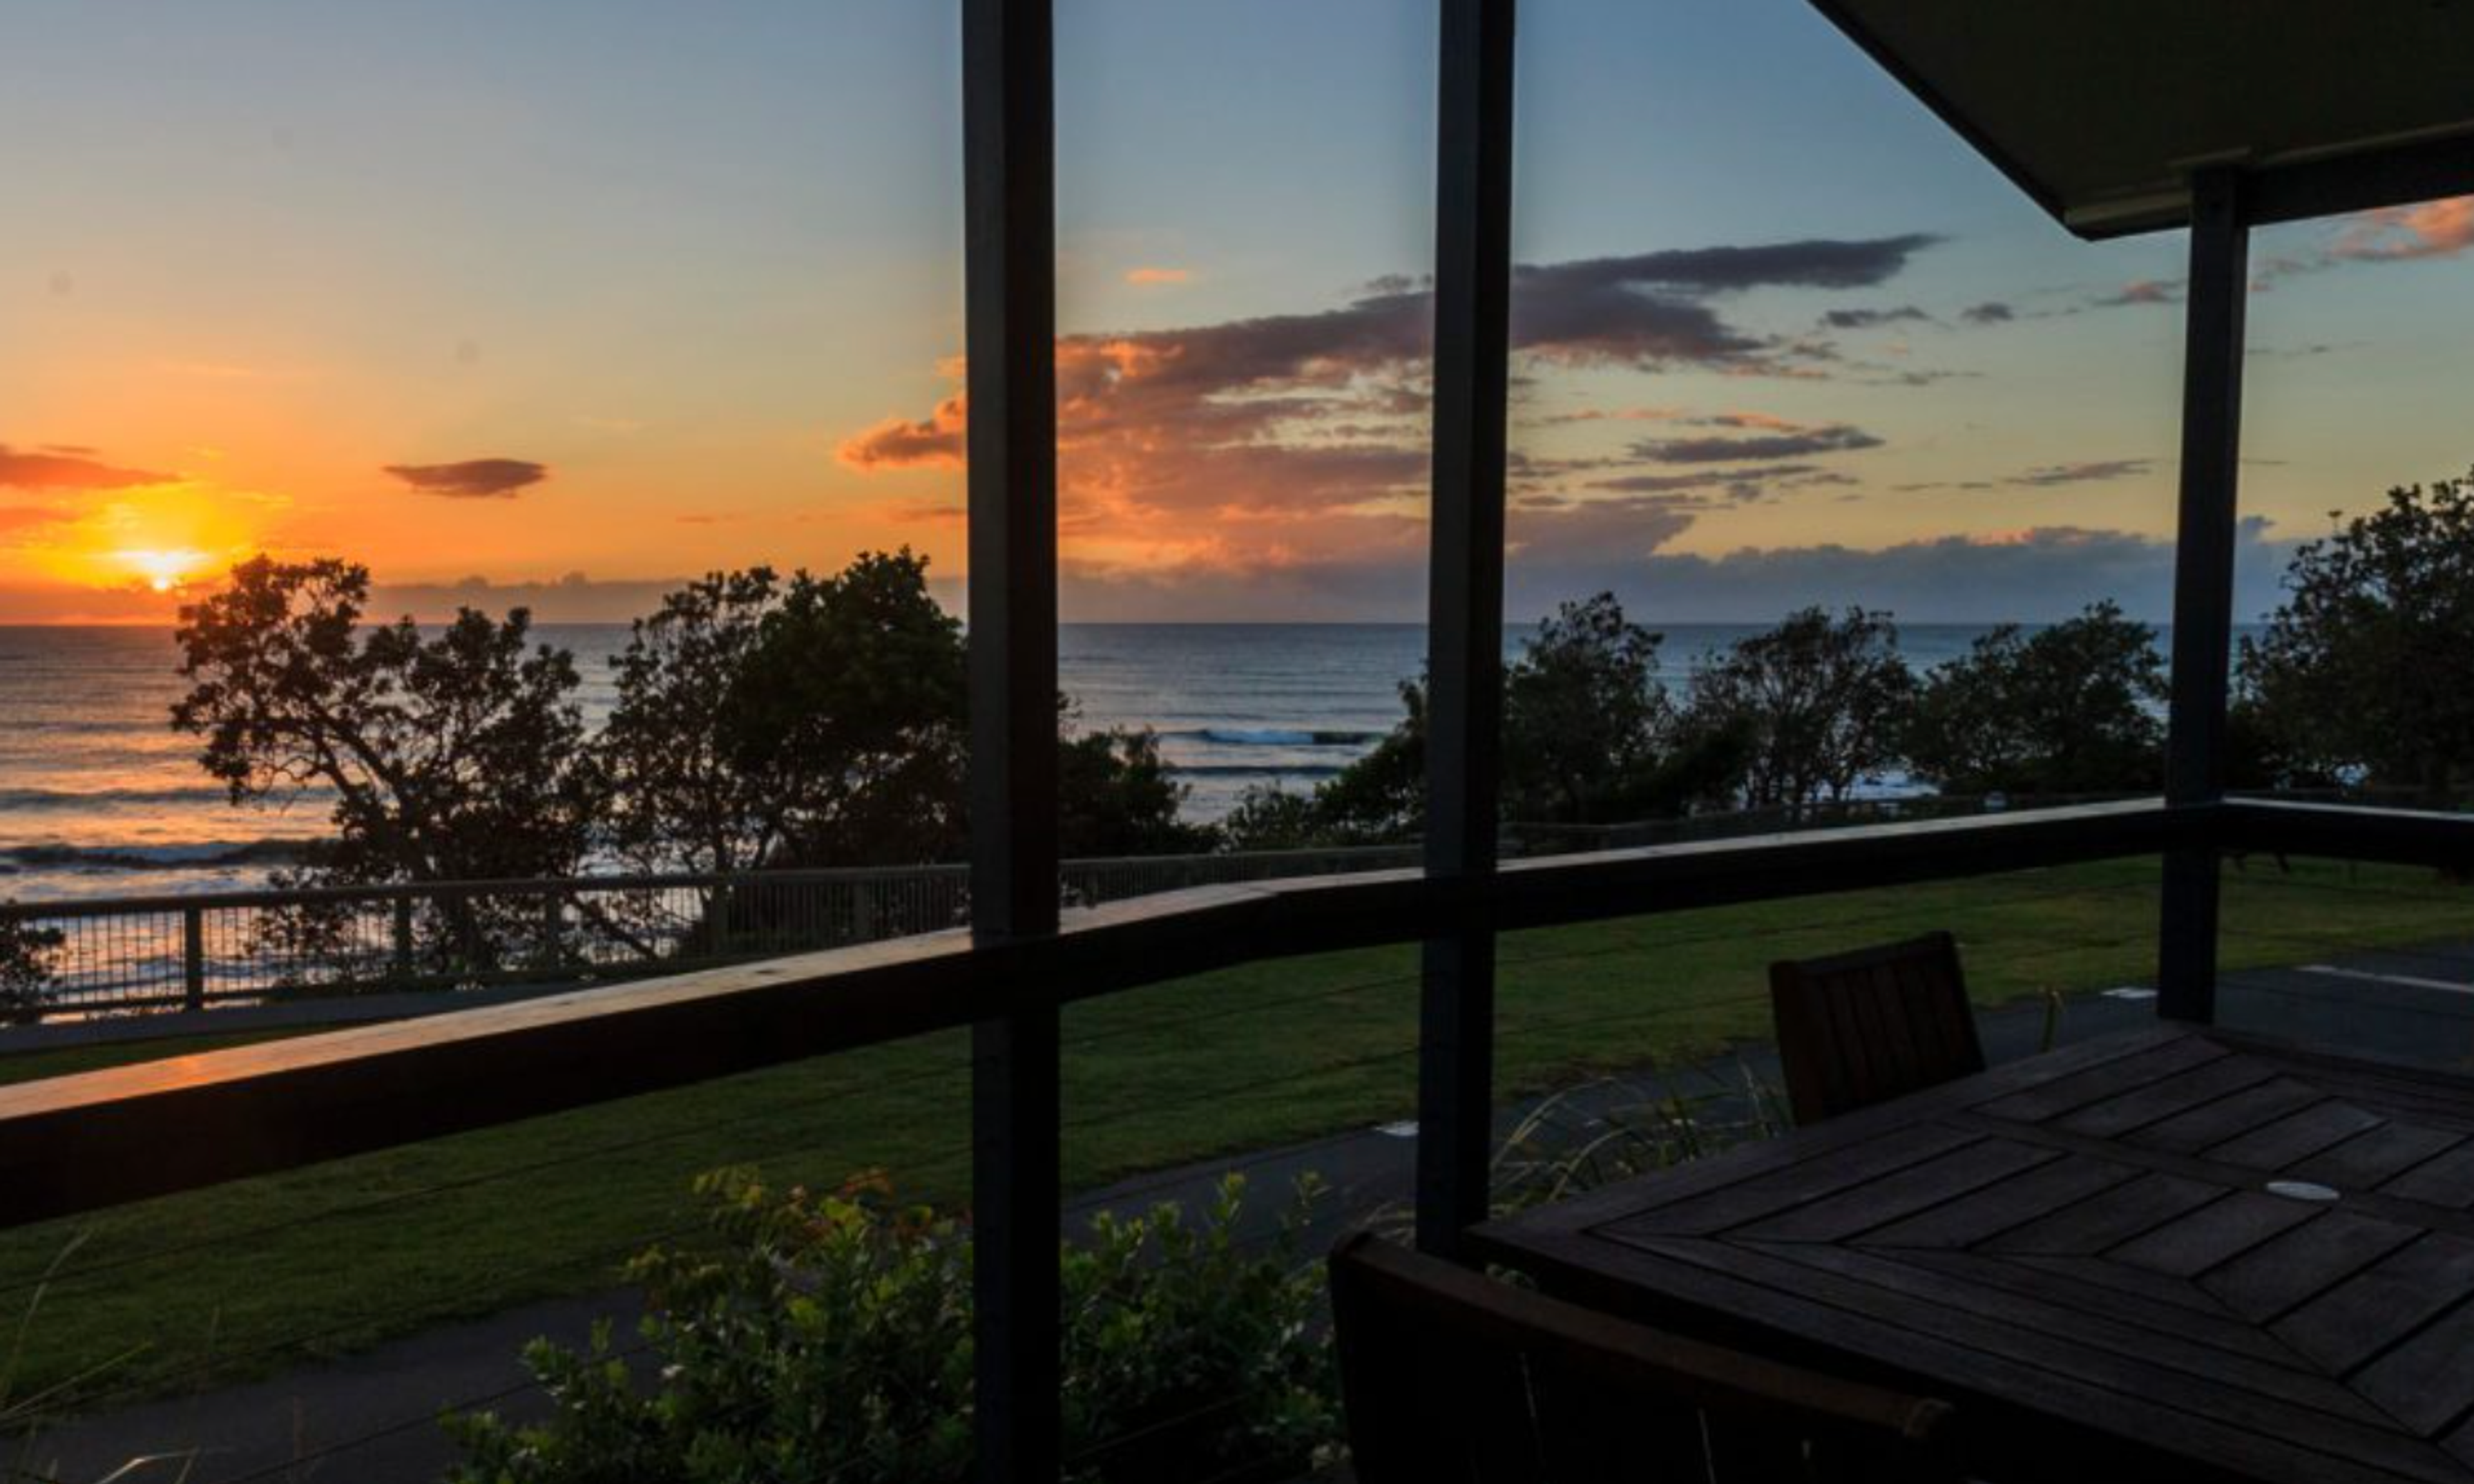 Reflections Holidays Bonny Hills holiday & caravan park sunrise ocean view from cabin accommodation deck